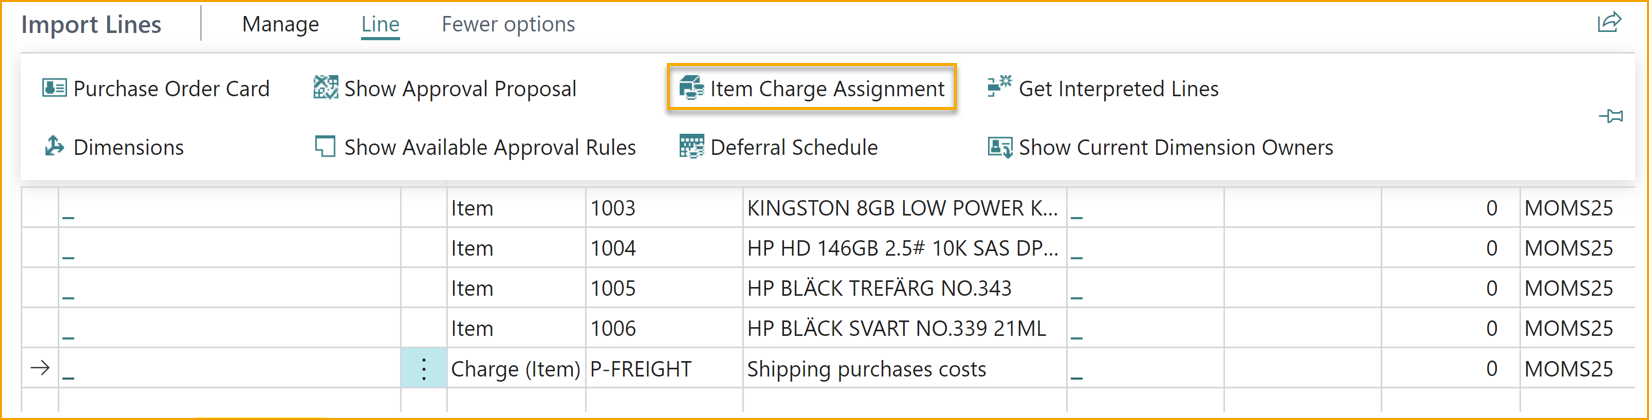 ExFlow Import journal - Import Lines - Item Charge Assignment